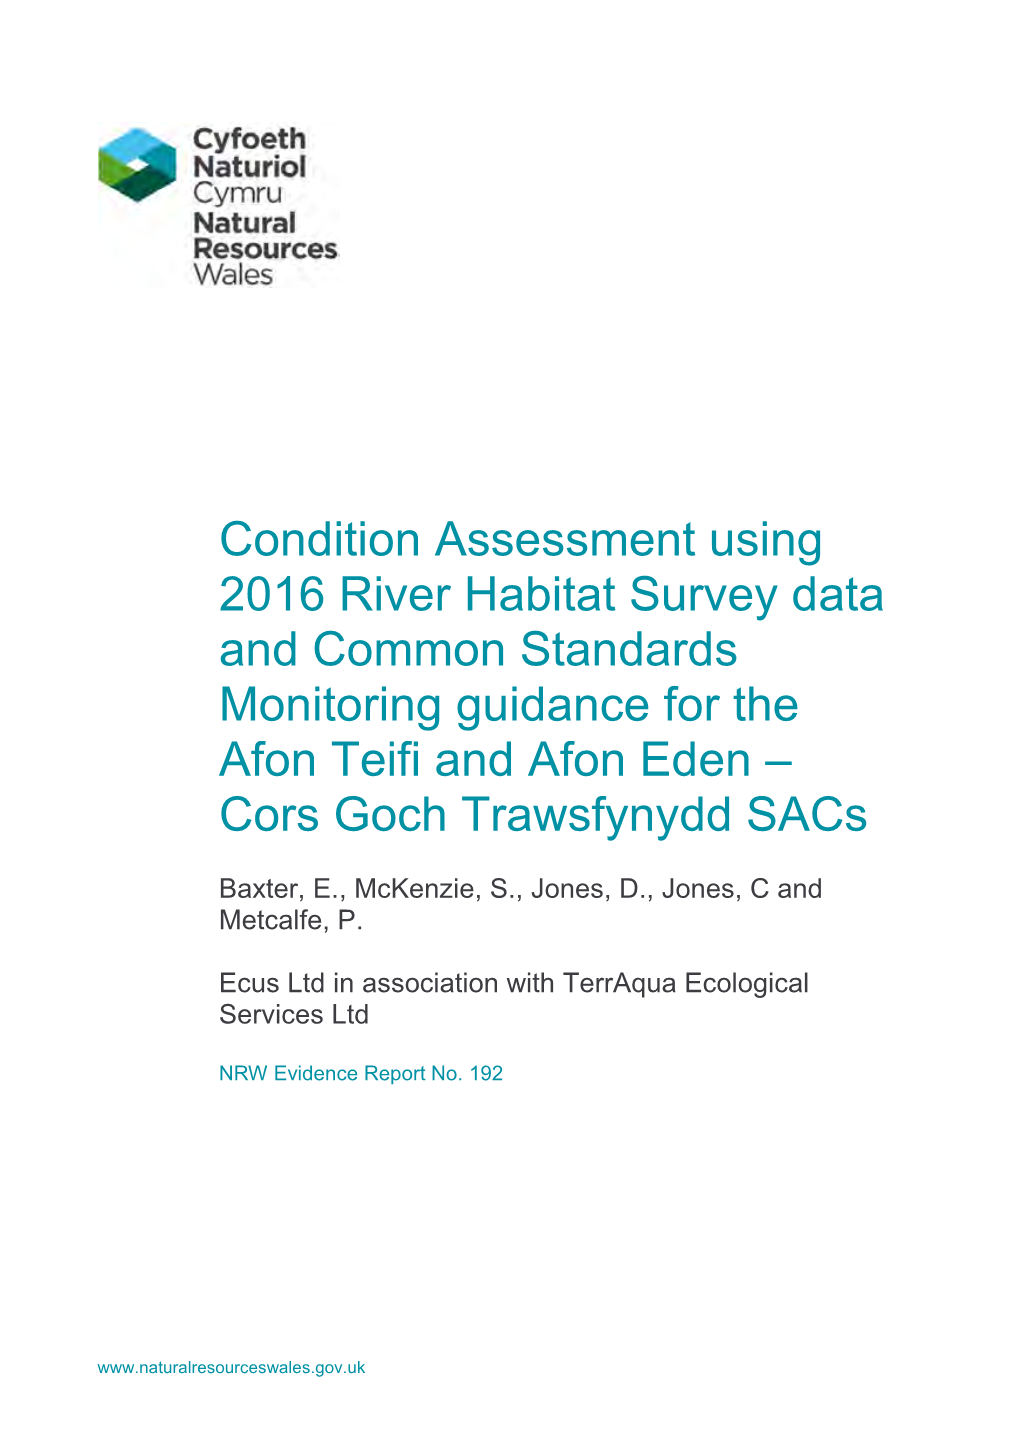 Condition Assessment Using 2016 River Habitat Survey Data and Common Standards Monitoring Guidance for the Afon Teifi and Afon Eden – Cors Goch Trawsfynydd Sacs